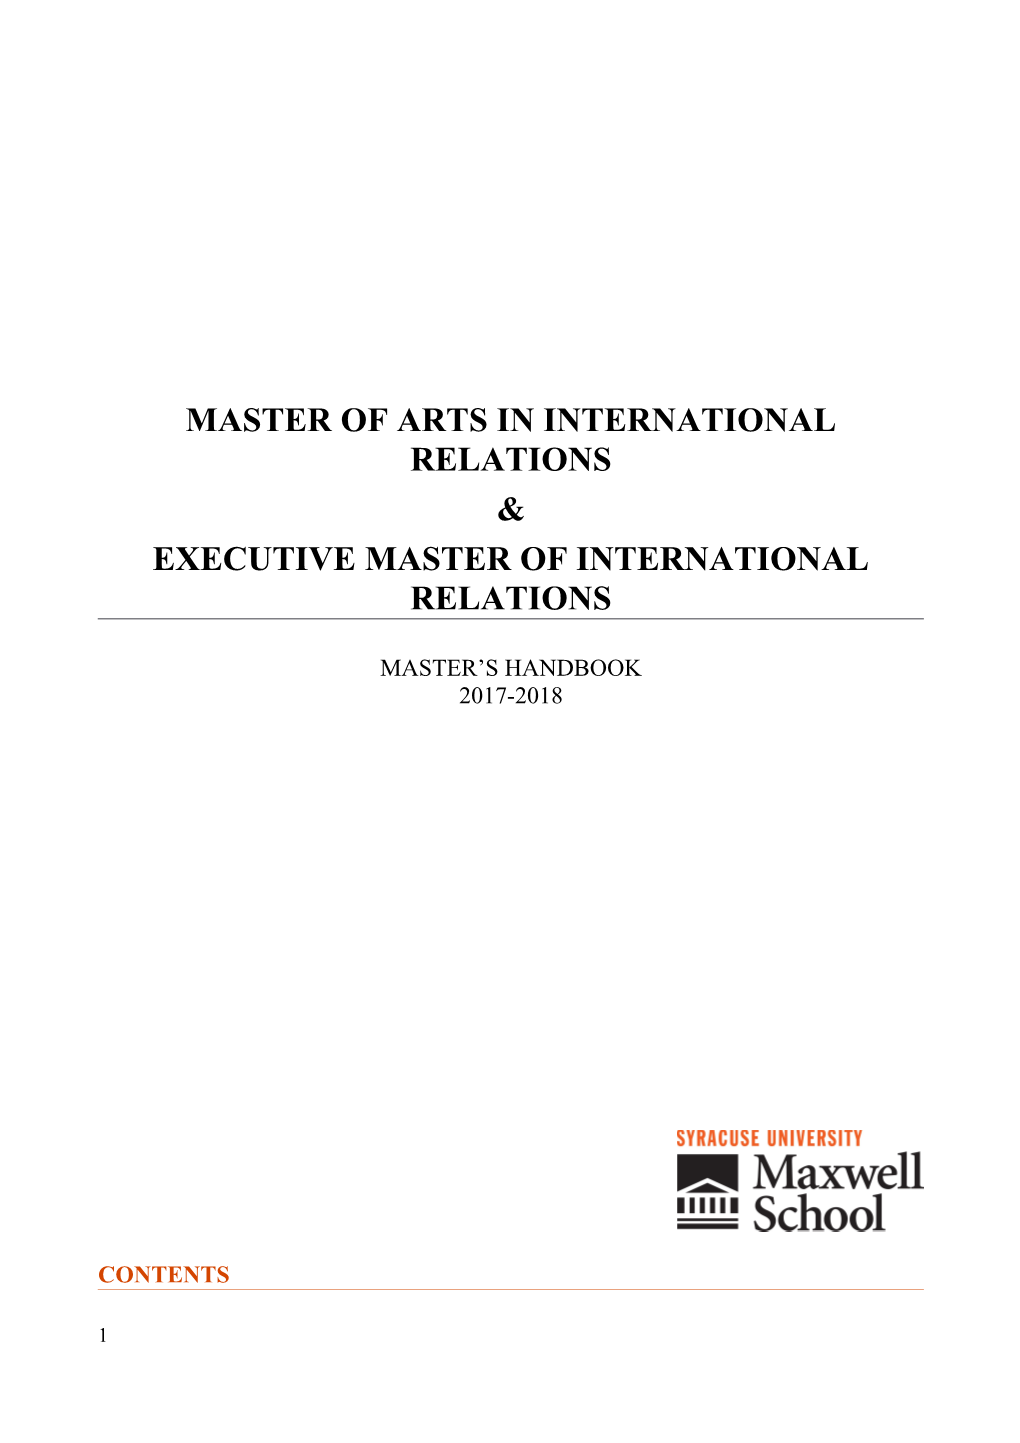 Master of Arts in International Relations